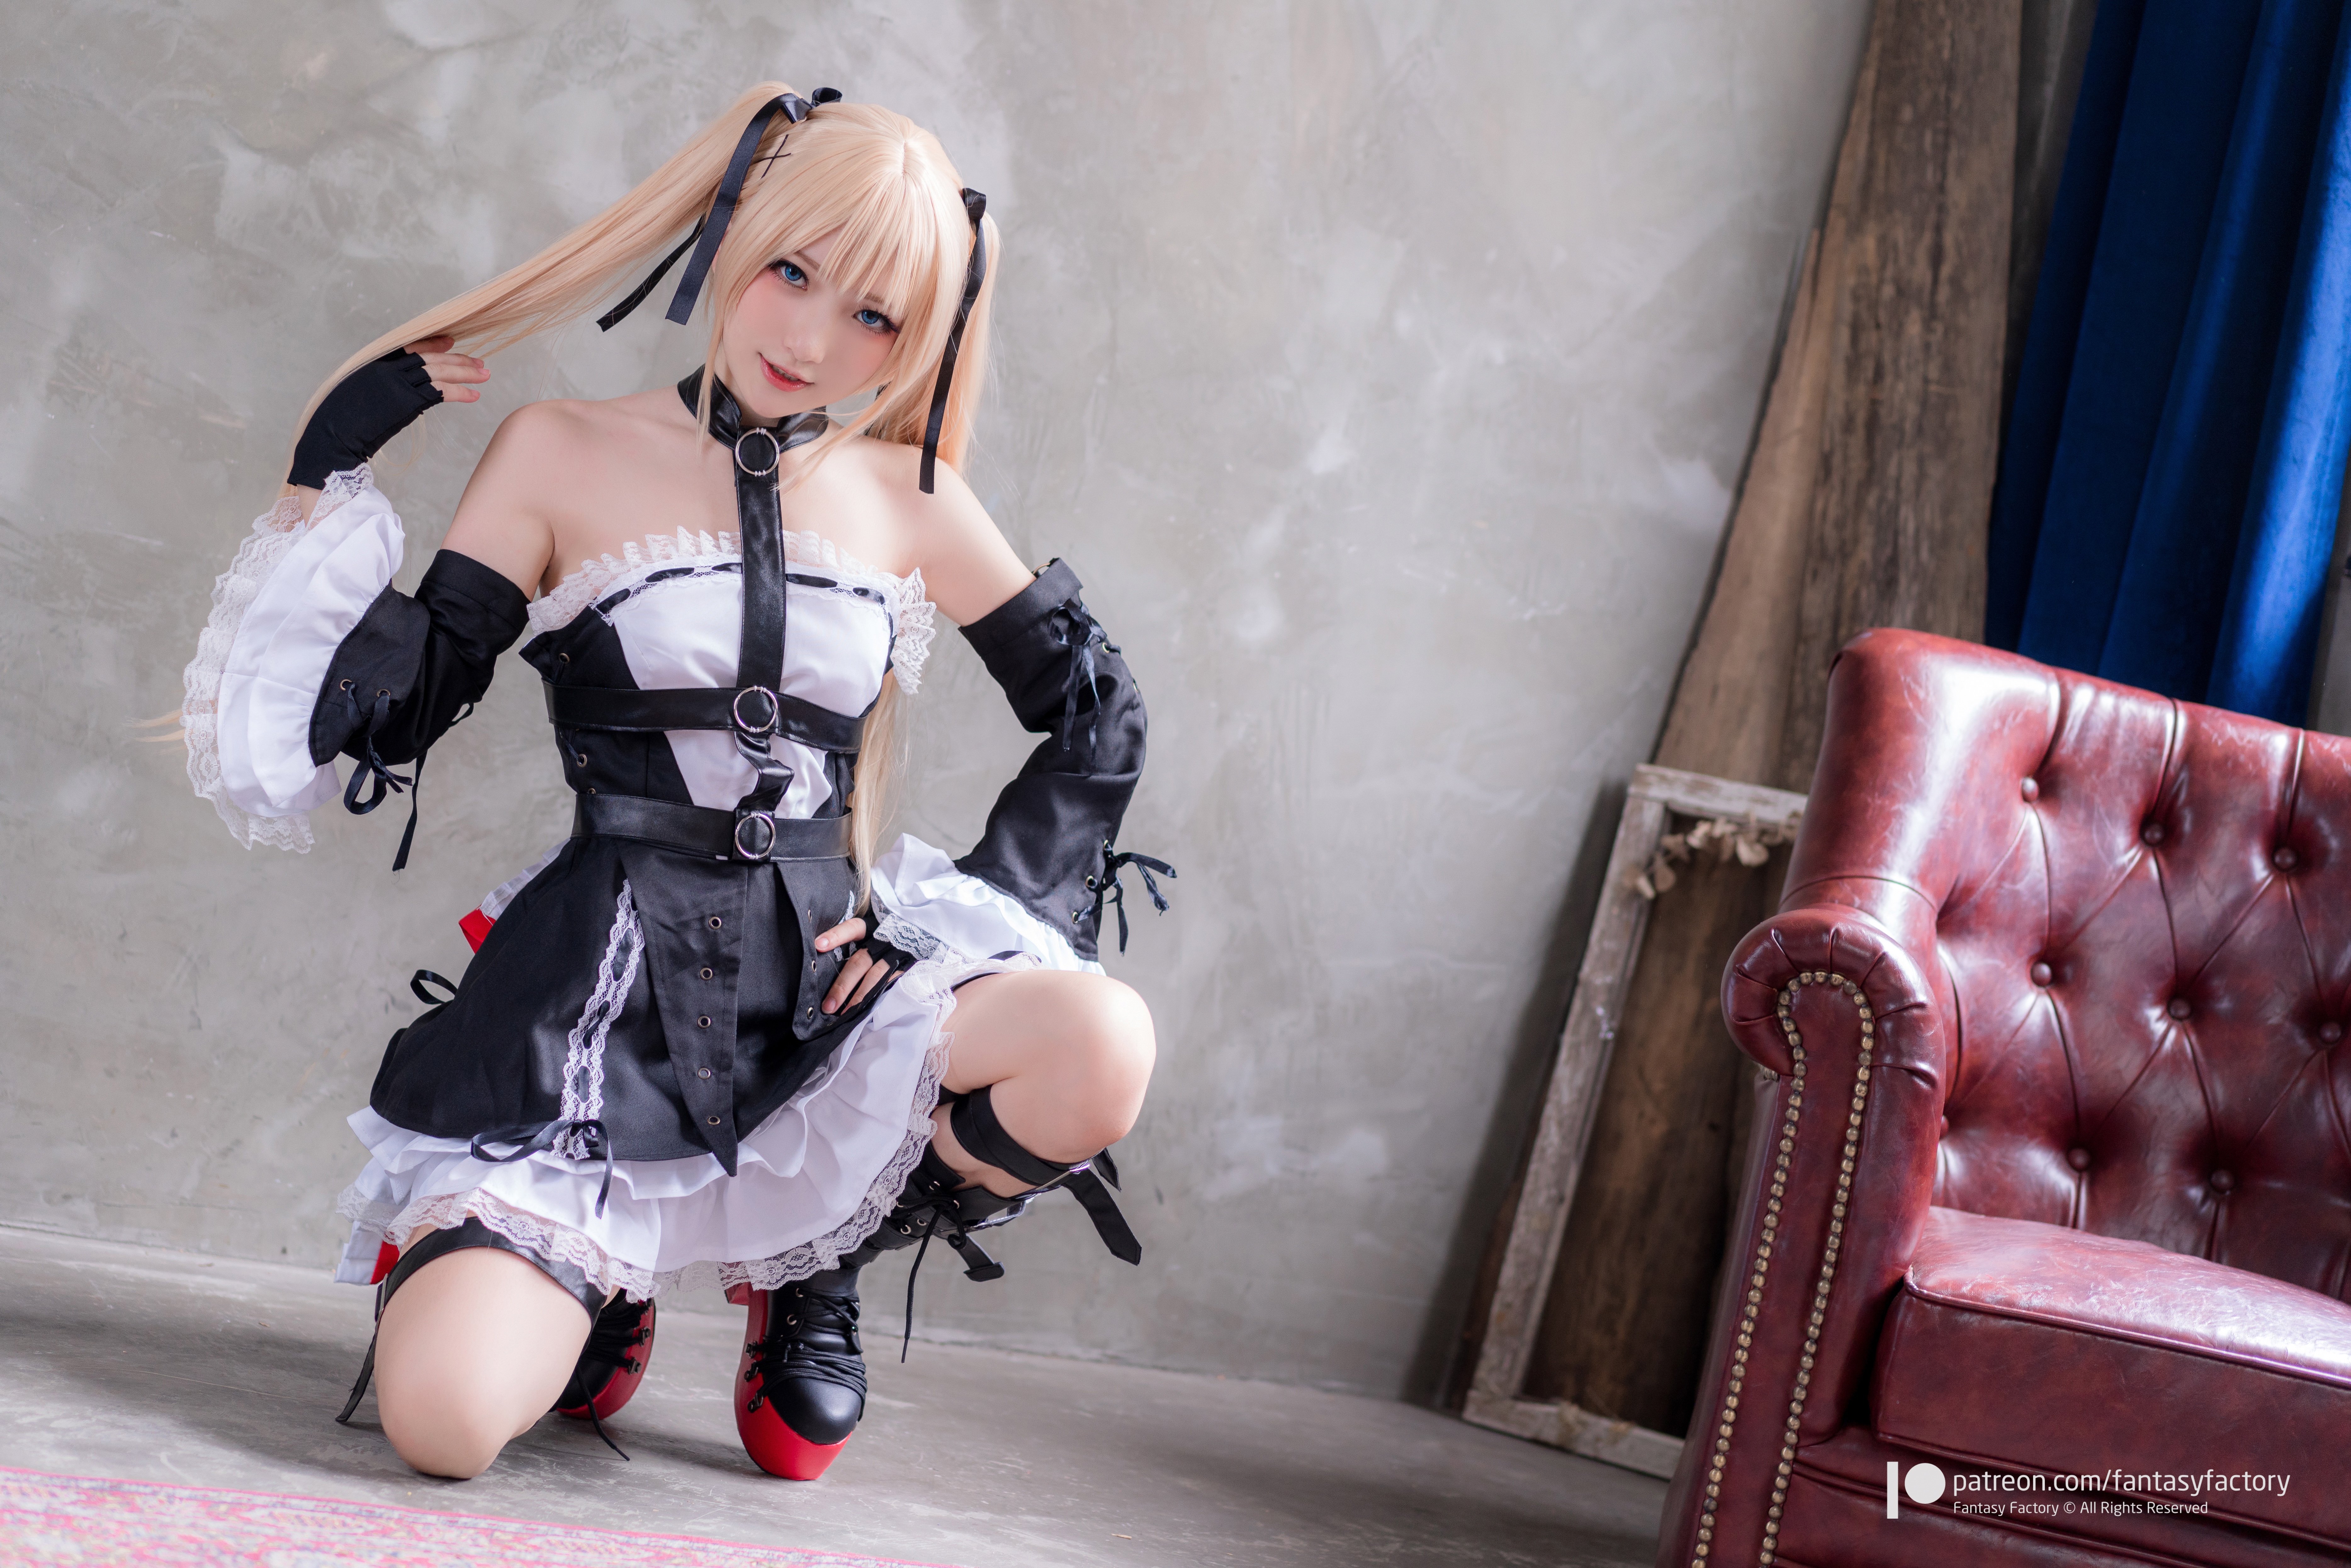 People 7470x4983 Fantasy Factory women model Asian cosplay Marie Rose (Dead or Alive) Dead or Alive video games video game girls gothic lolita dress blonde twintails indoors women indoors